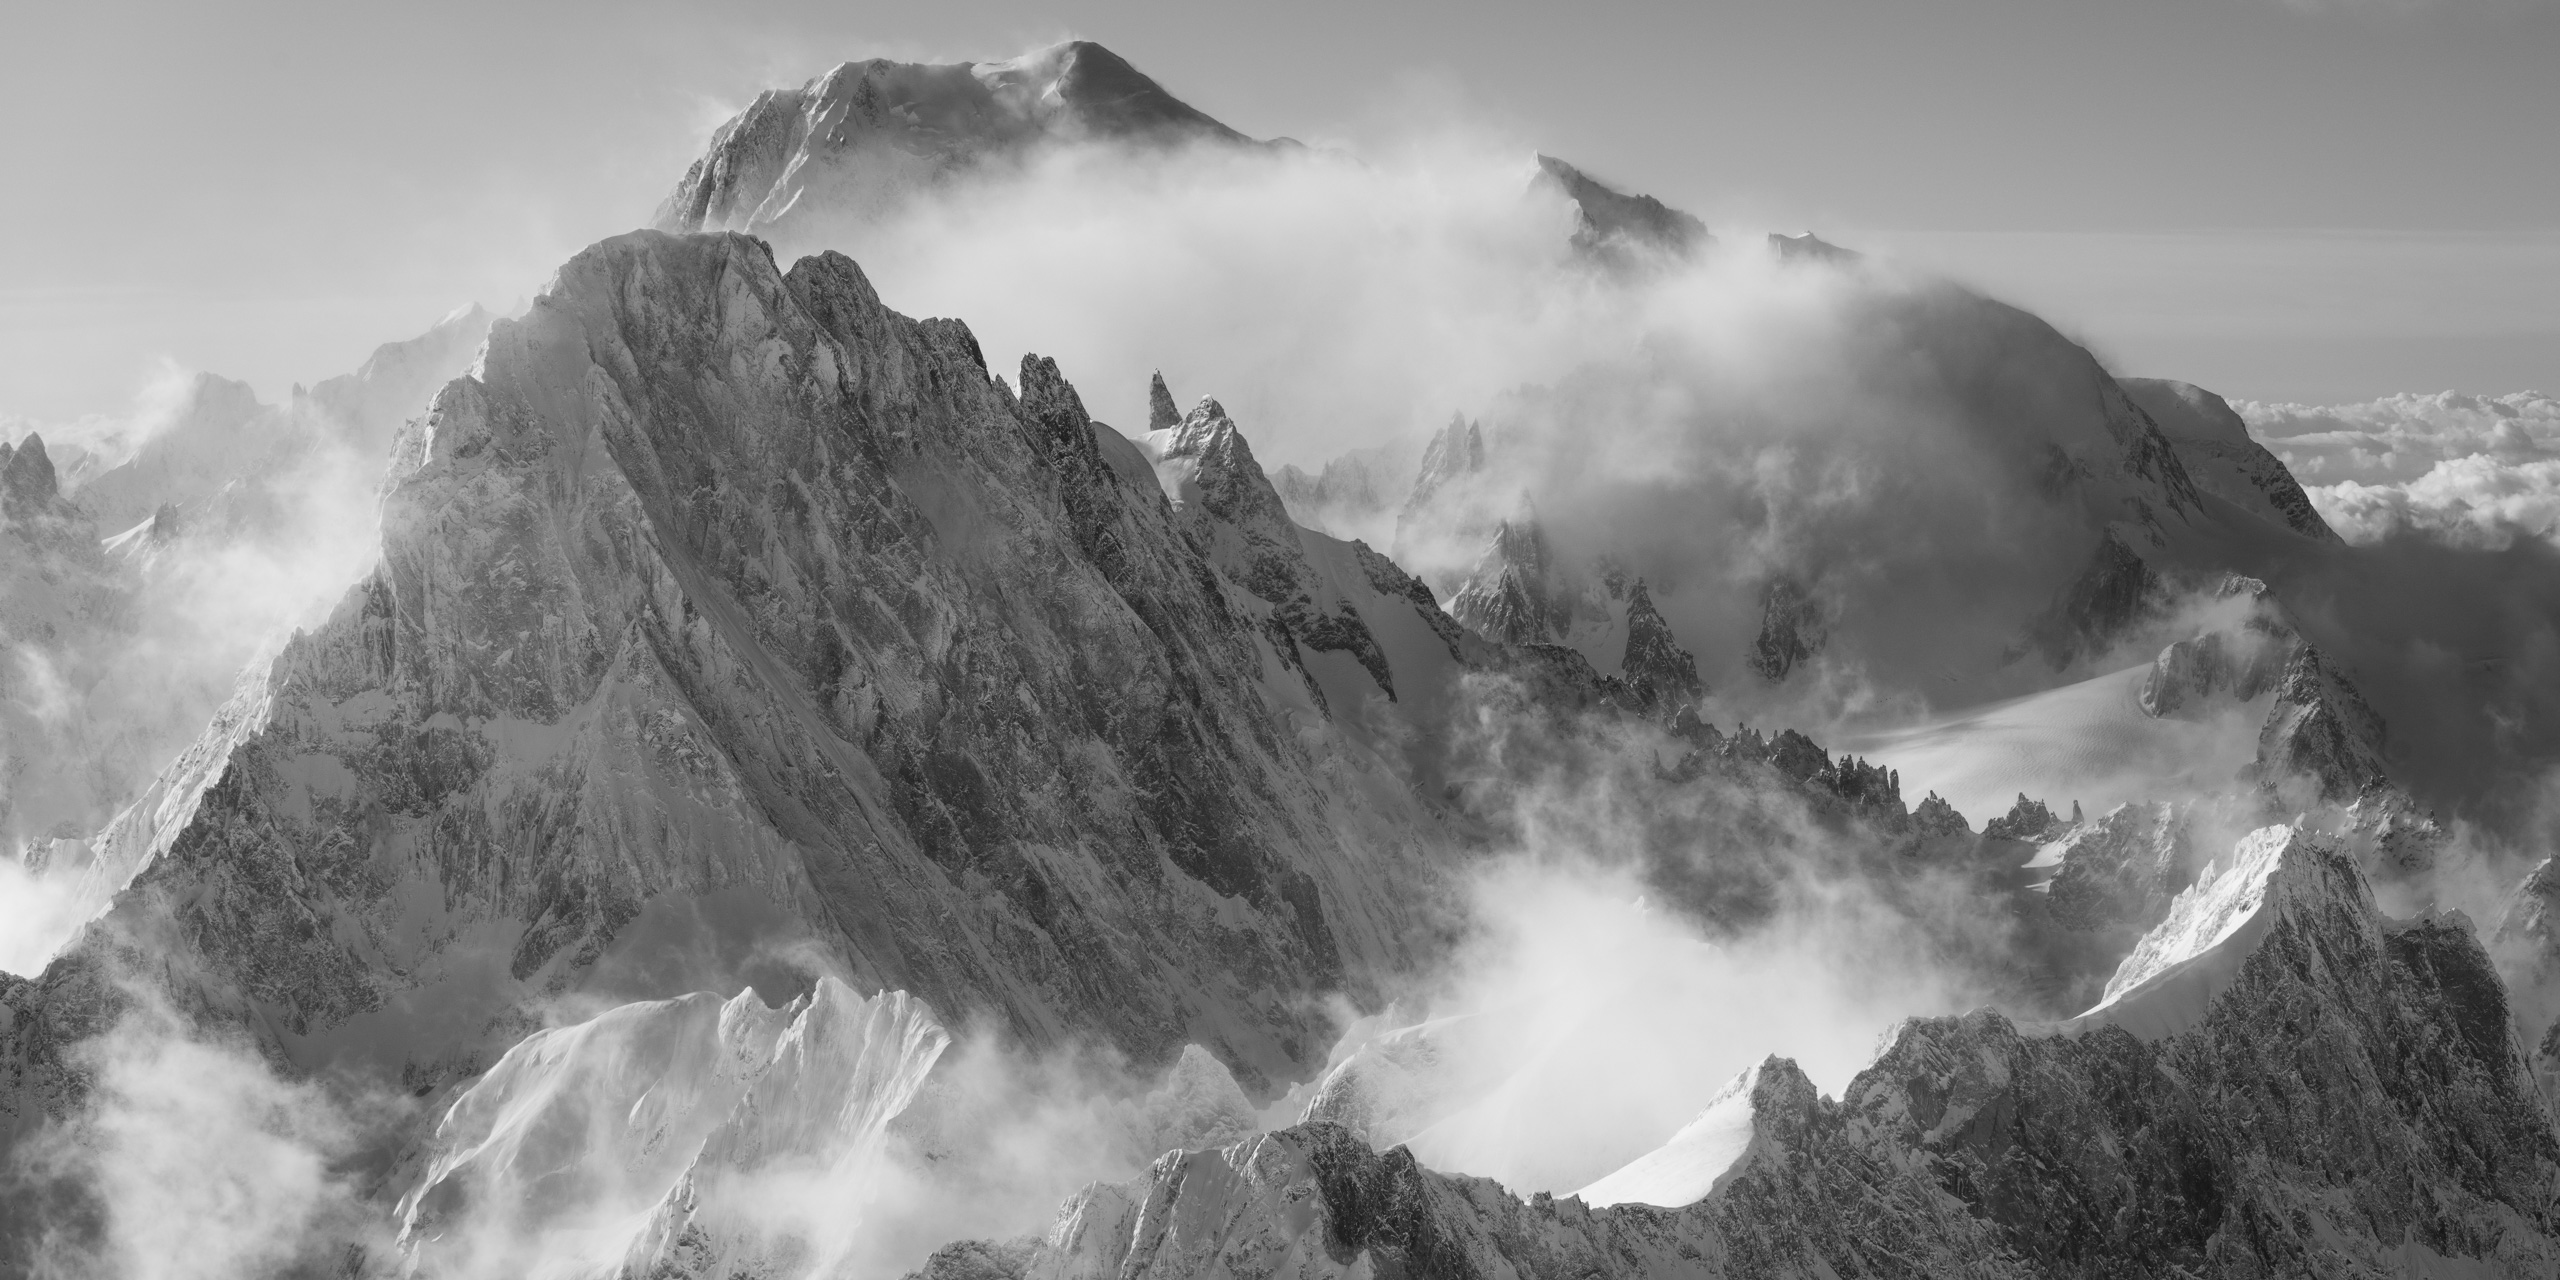 black and white photo of mont blanc - Panoramic poster image of mont blanc